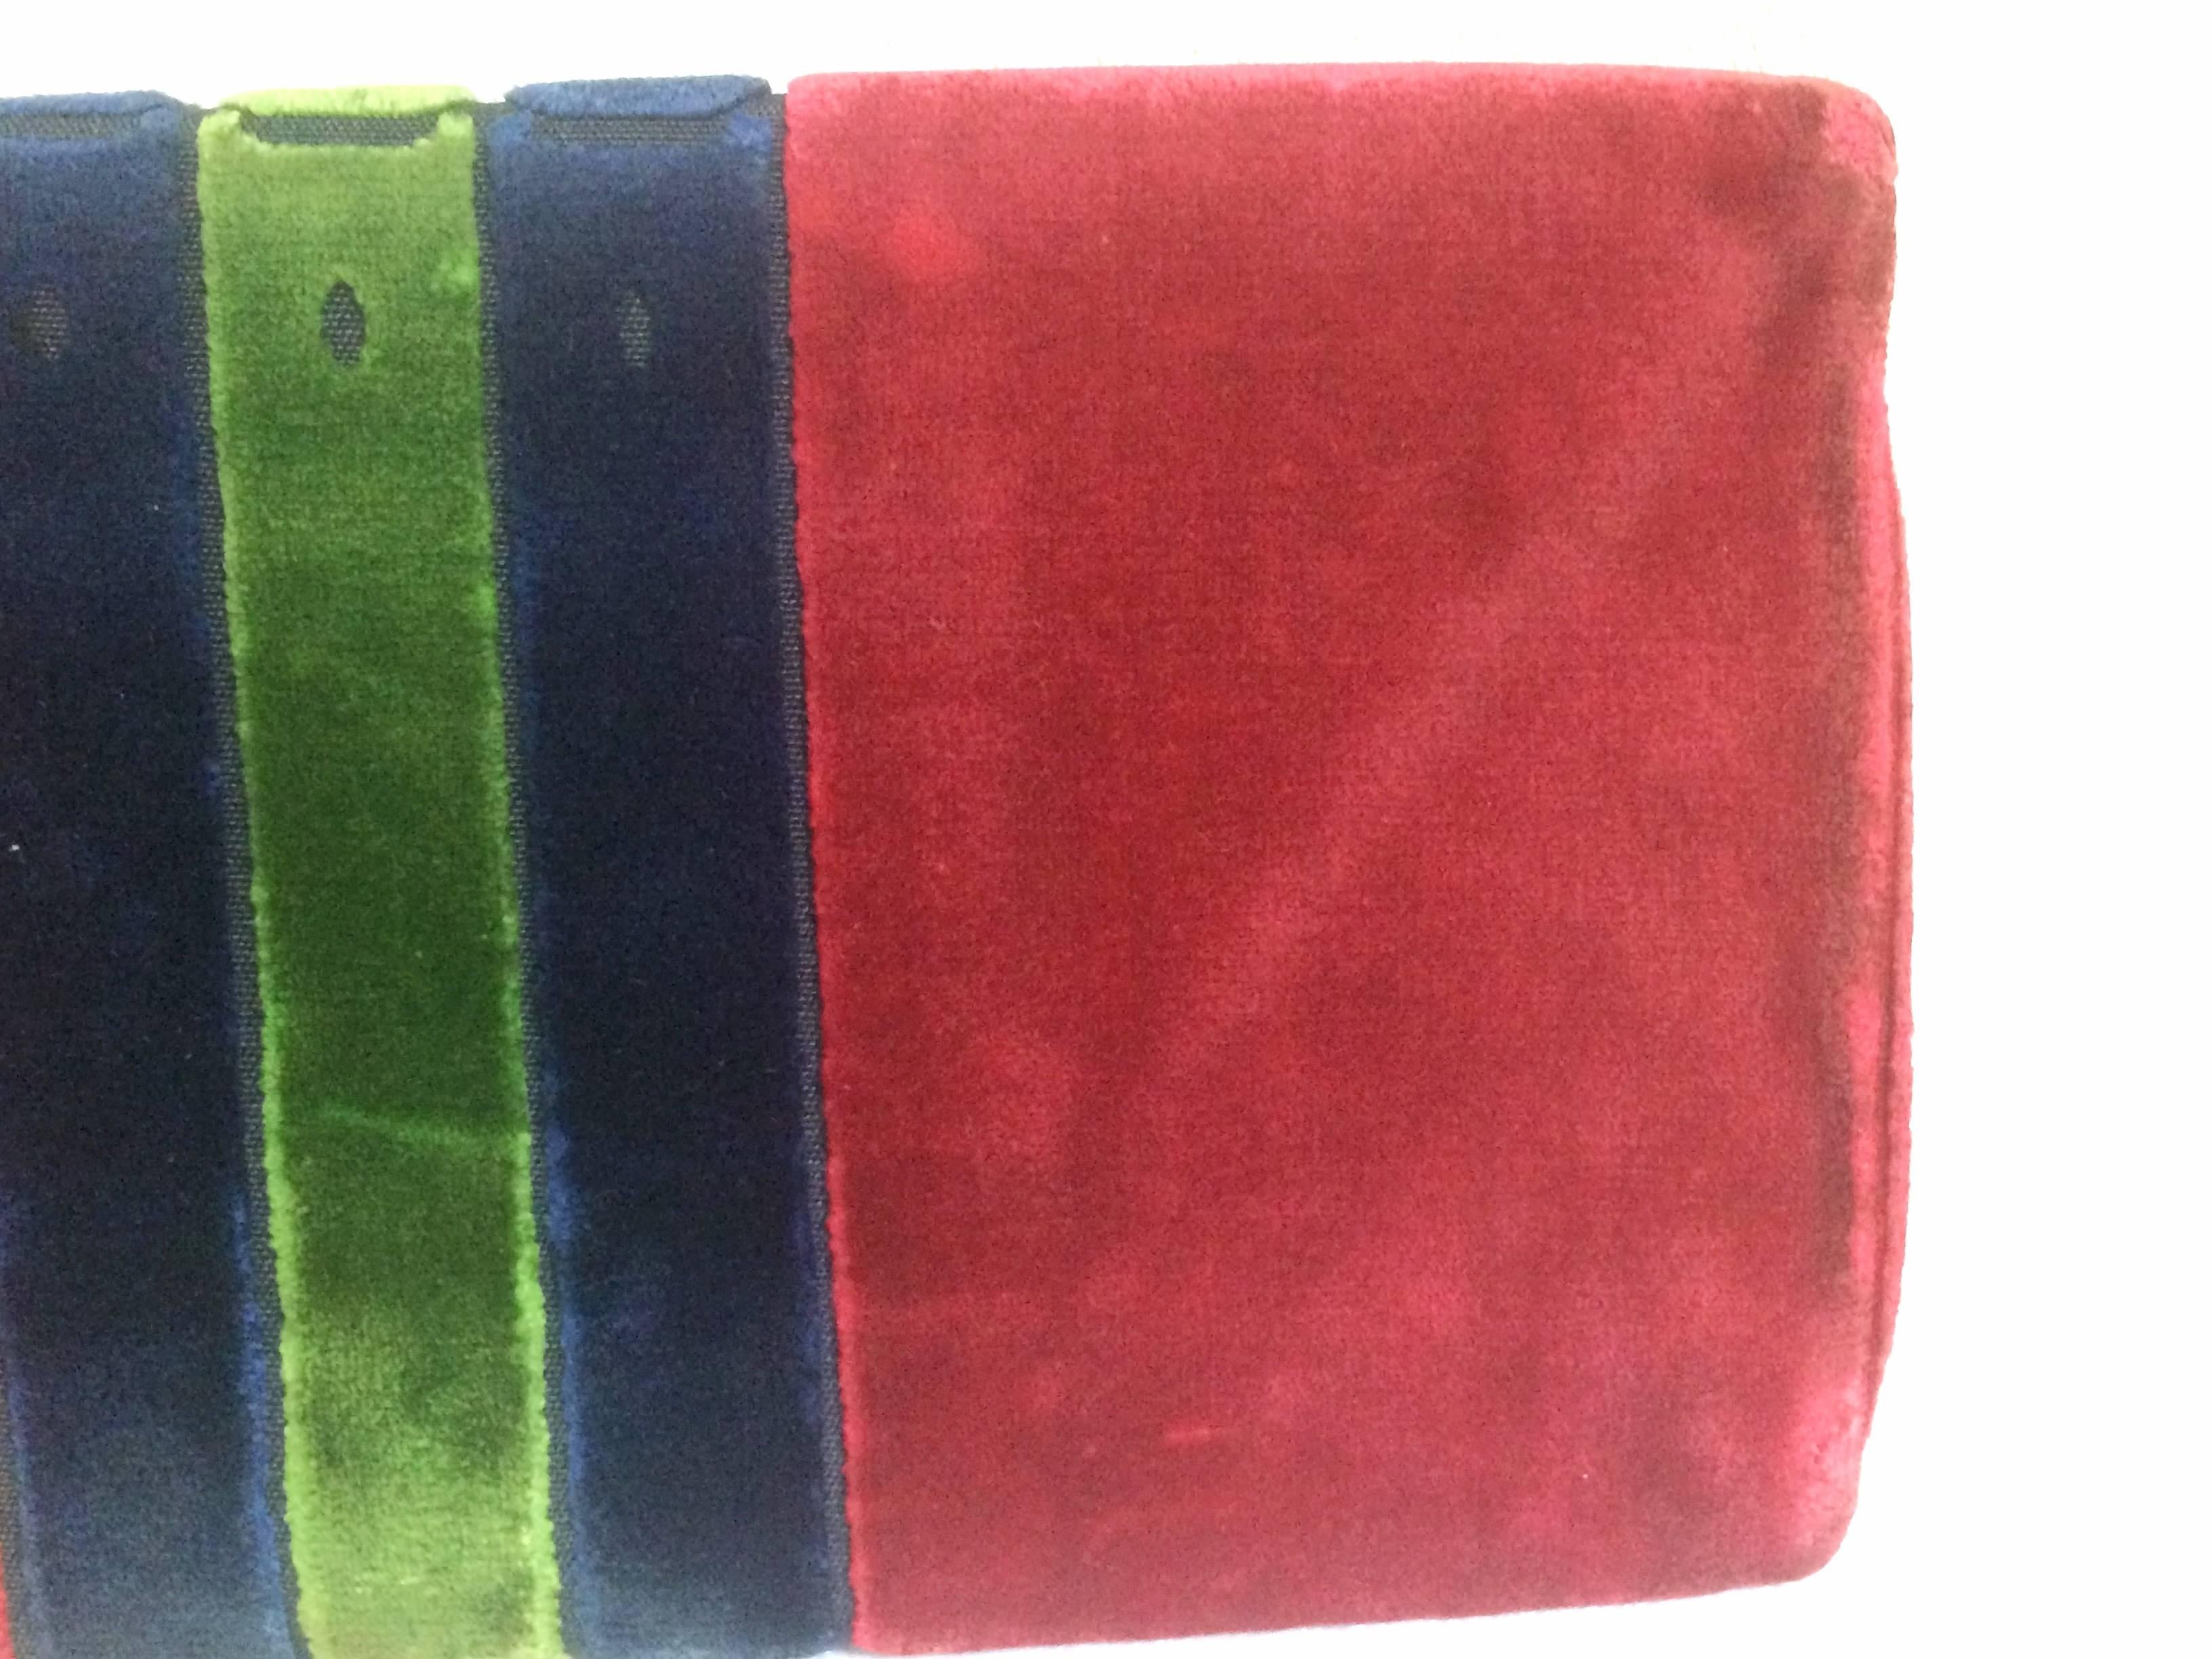 80's Vintage Roberta di Camerino velvet, chenille clutch in red, navy and green. 1